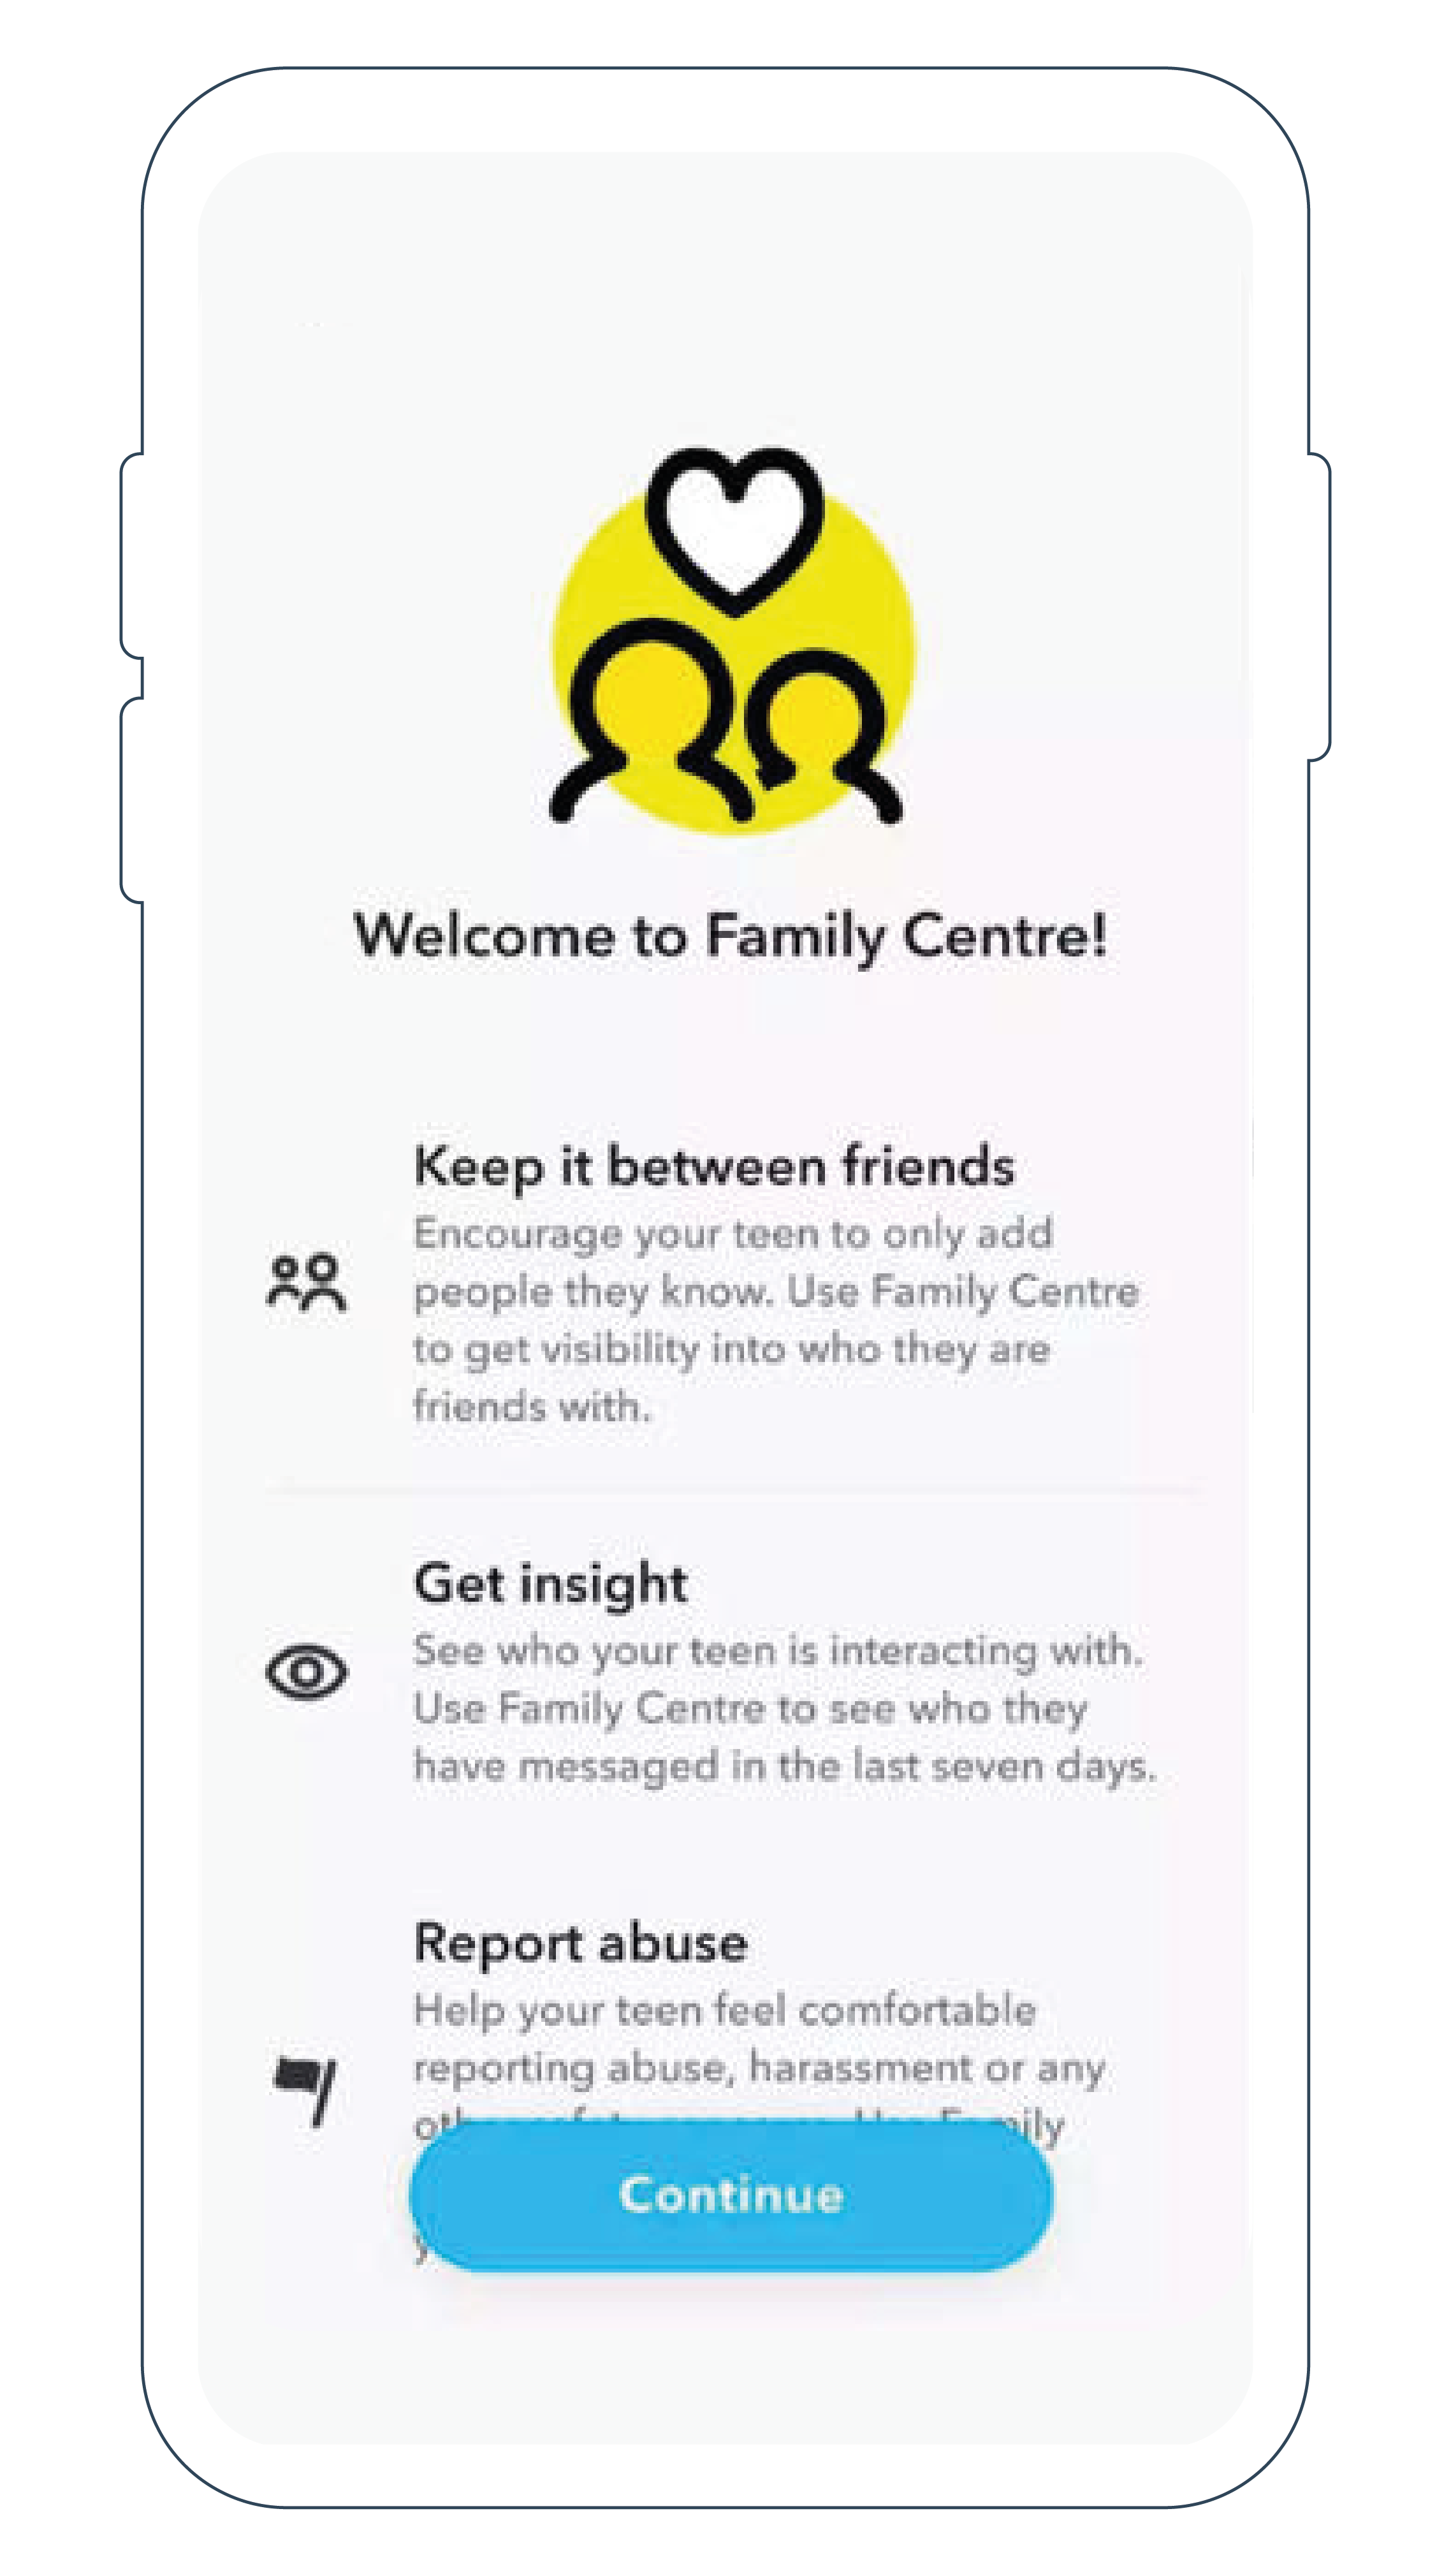 Image of the welcome to the family centre in mockup of a phone